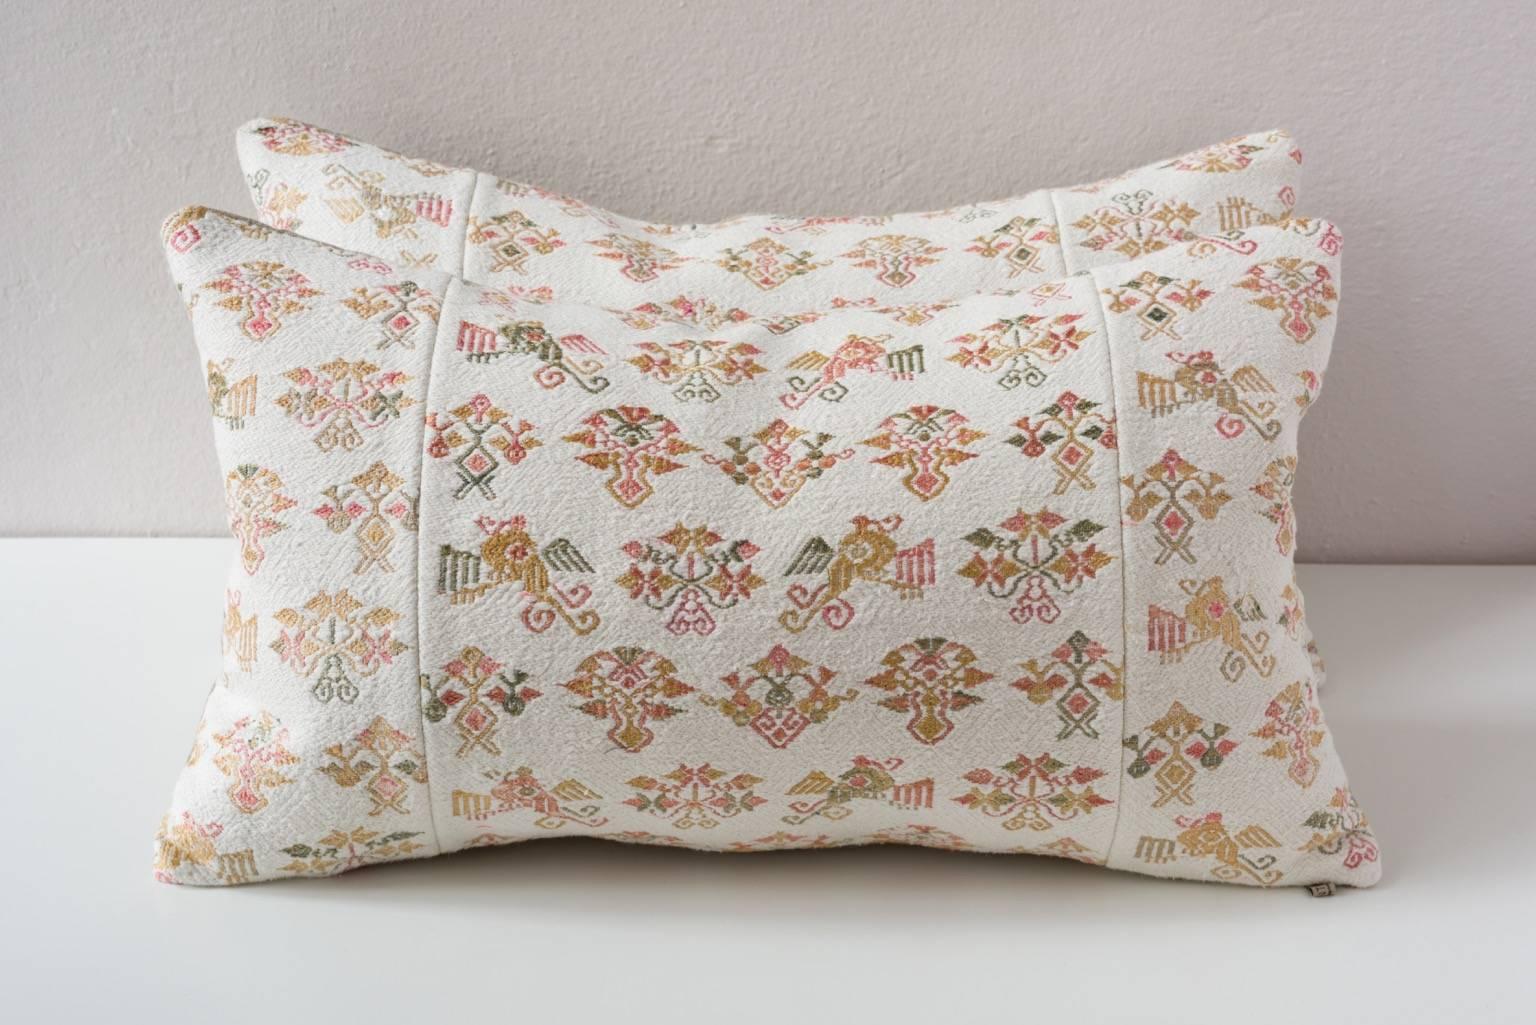 Maonan wedding blanket cushion in a beautiful cream and pale tans and pinks peaches and greens and golds. 

Linen on reverse see image
75/25 goose feather and down inserts.
Concealed zippers.
Check our 1stdibs storefront for pillows in